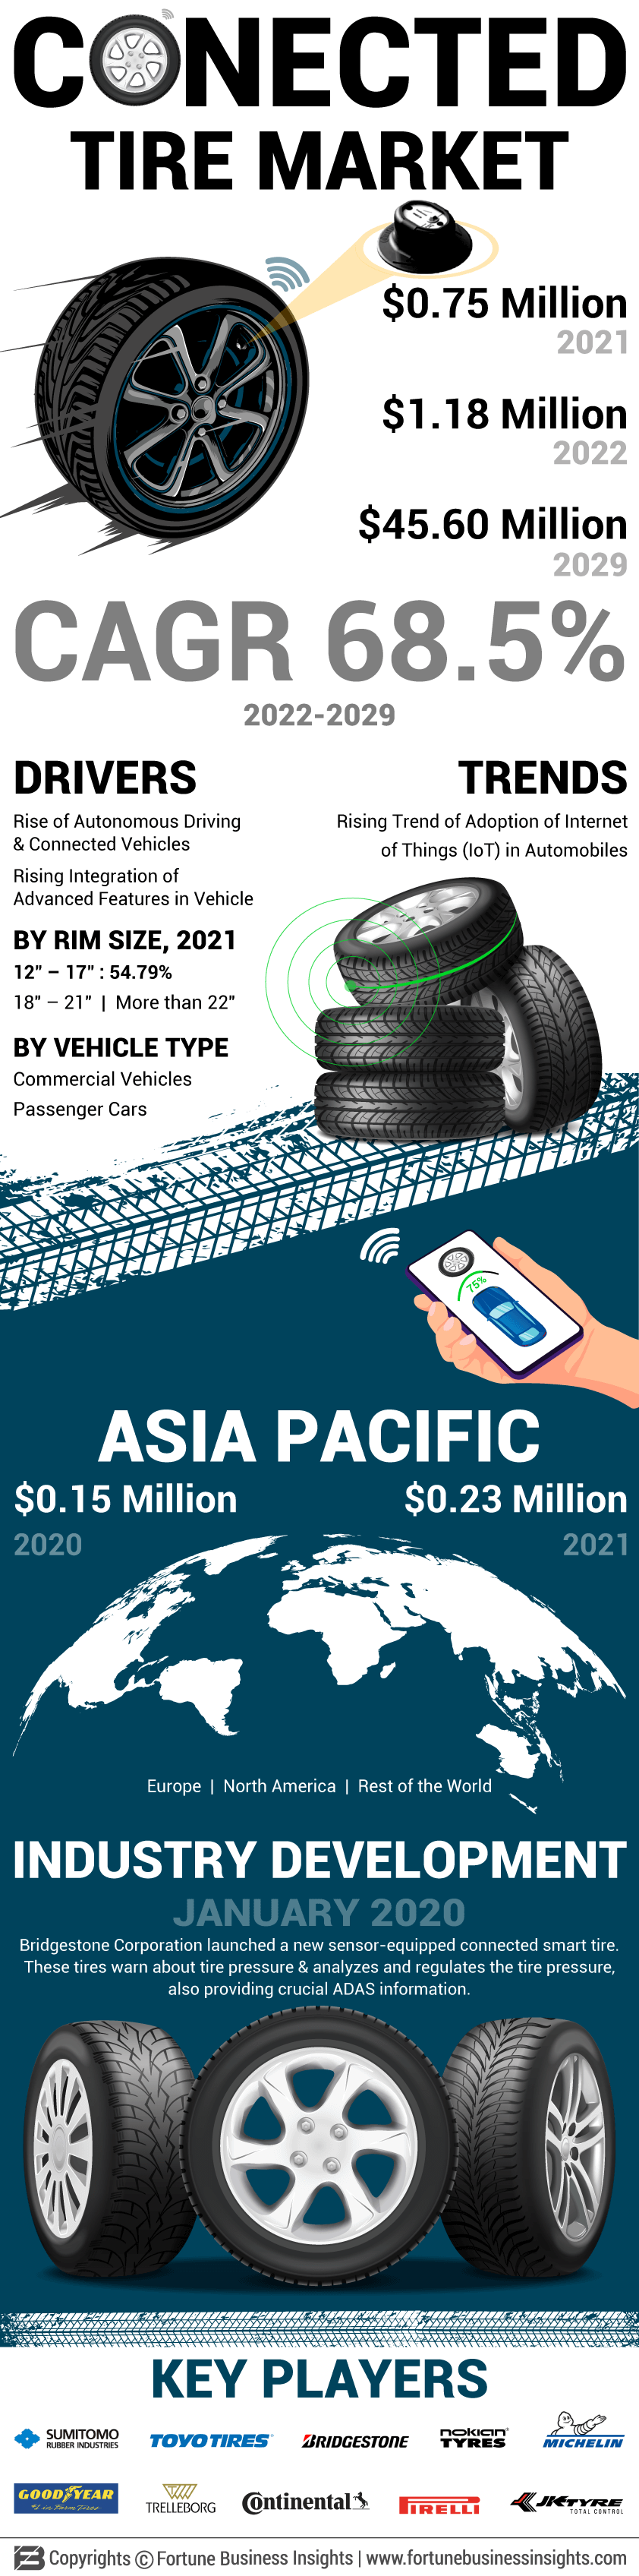 Connected Tire Market